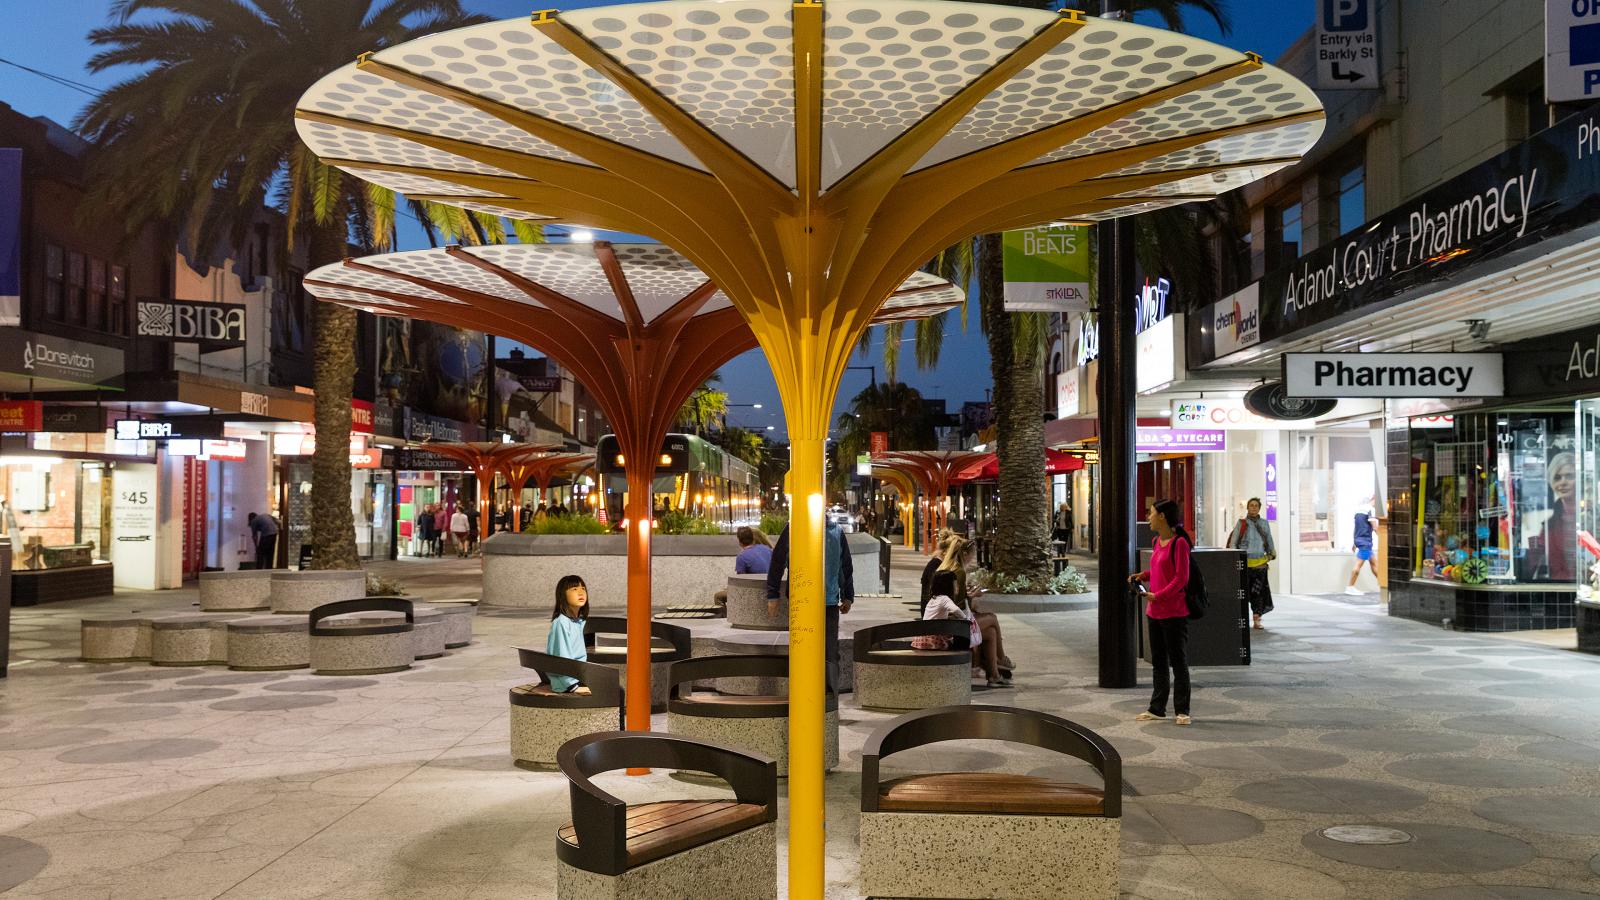 A vibrant, well-lit city street in the evening with modern umbrella-shaped structures providing shade over circular benches. People are seen walking and sitting on the benches. Shops and stores, including a pharmacy, line both sides of Acland Street in St Kilda.